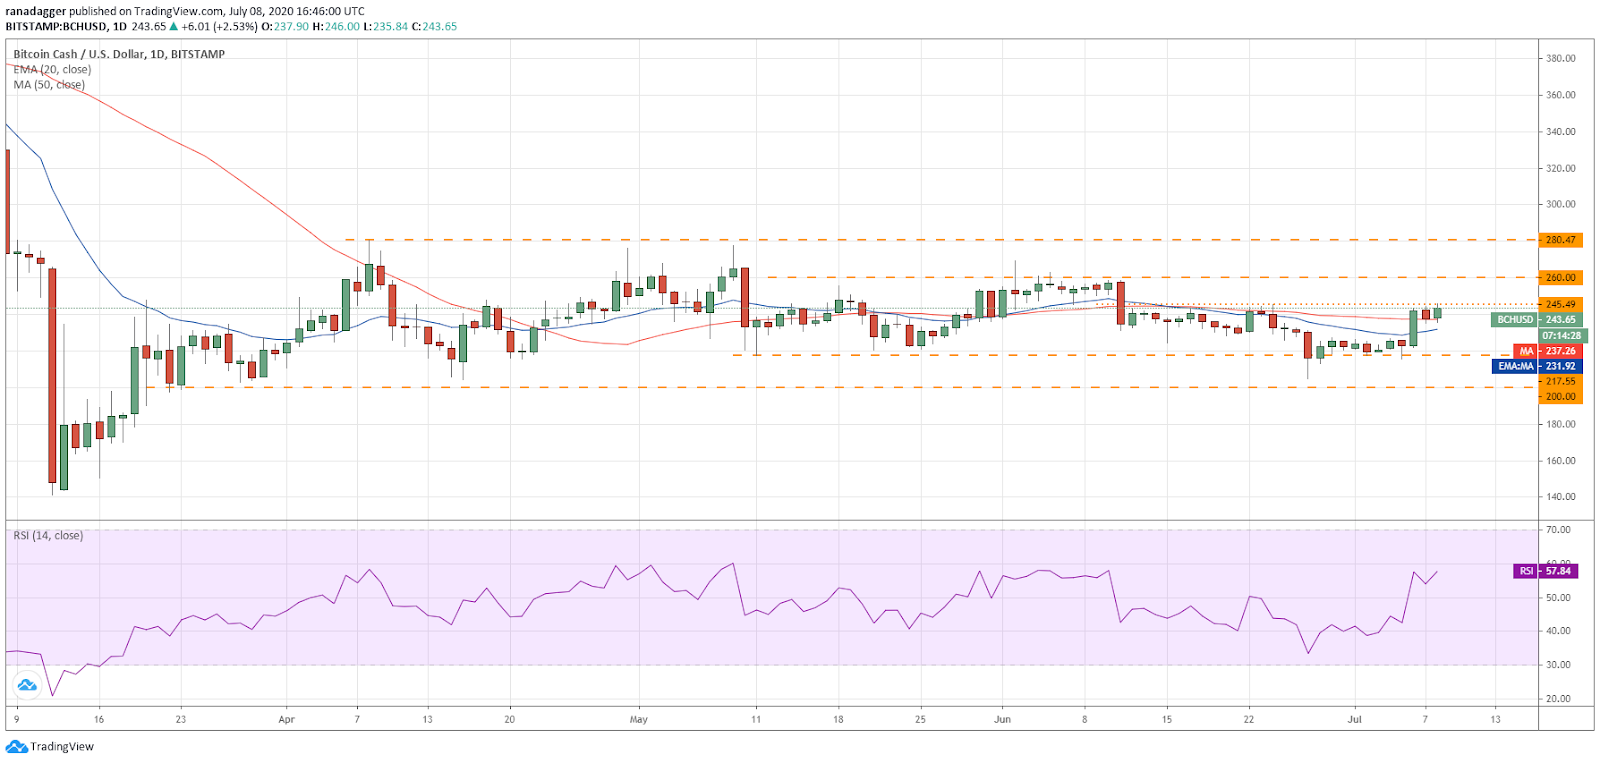 BCH/USD daily chart. Source: TradingView​​​​​​​